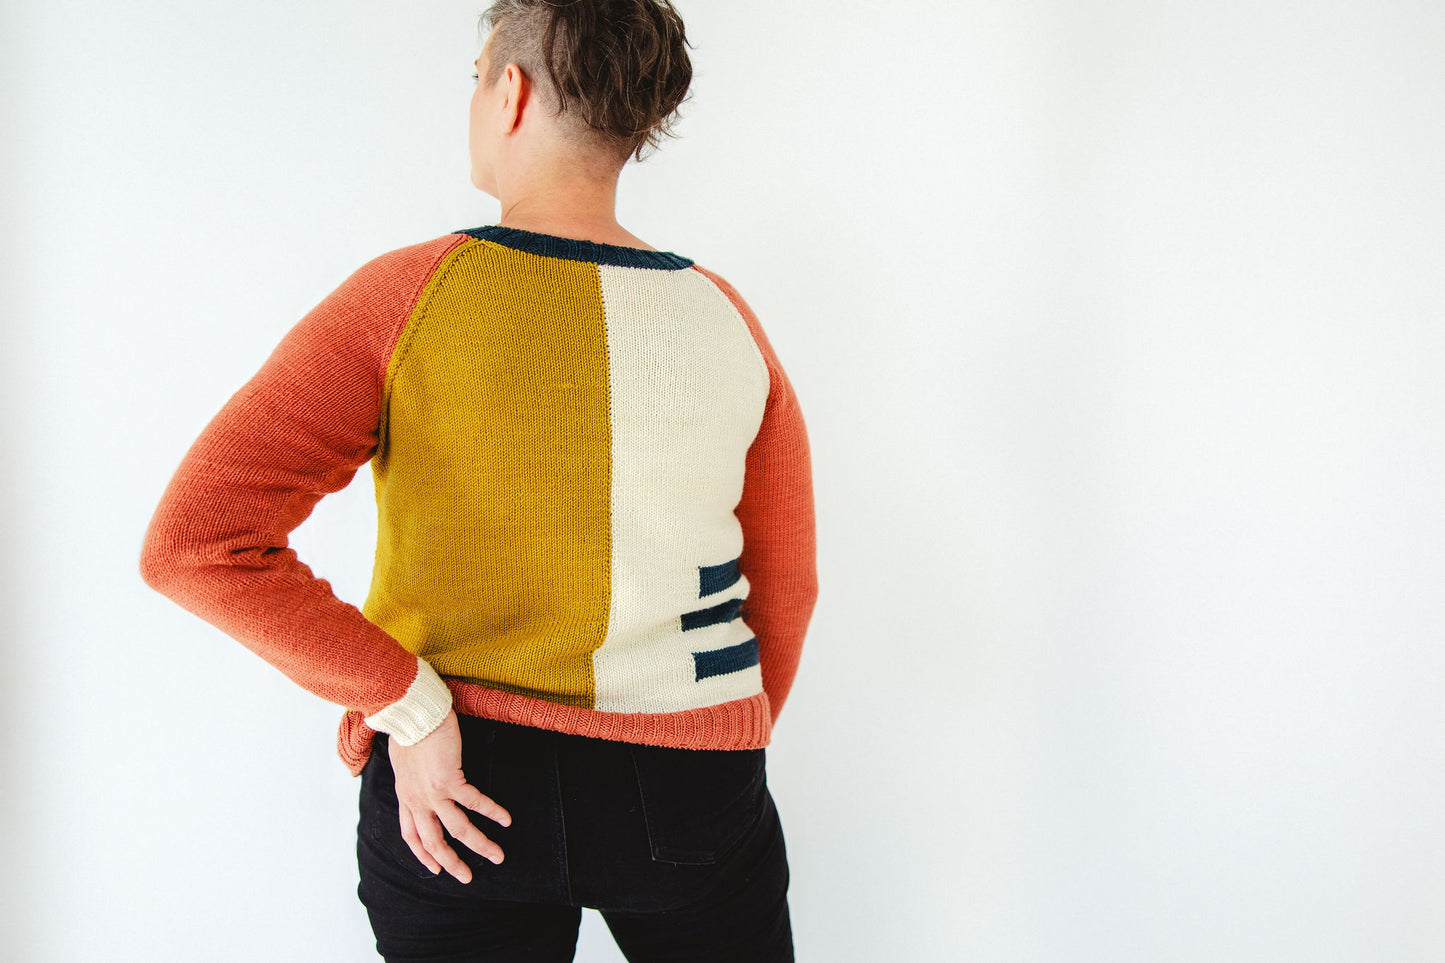 Seen from behind, the camera focuses on the details of Jen's white, navy blue, ochre, and pink sweater. The sweater features intarsia knitting techniques to create color blocks.